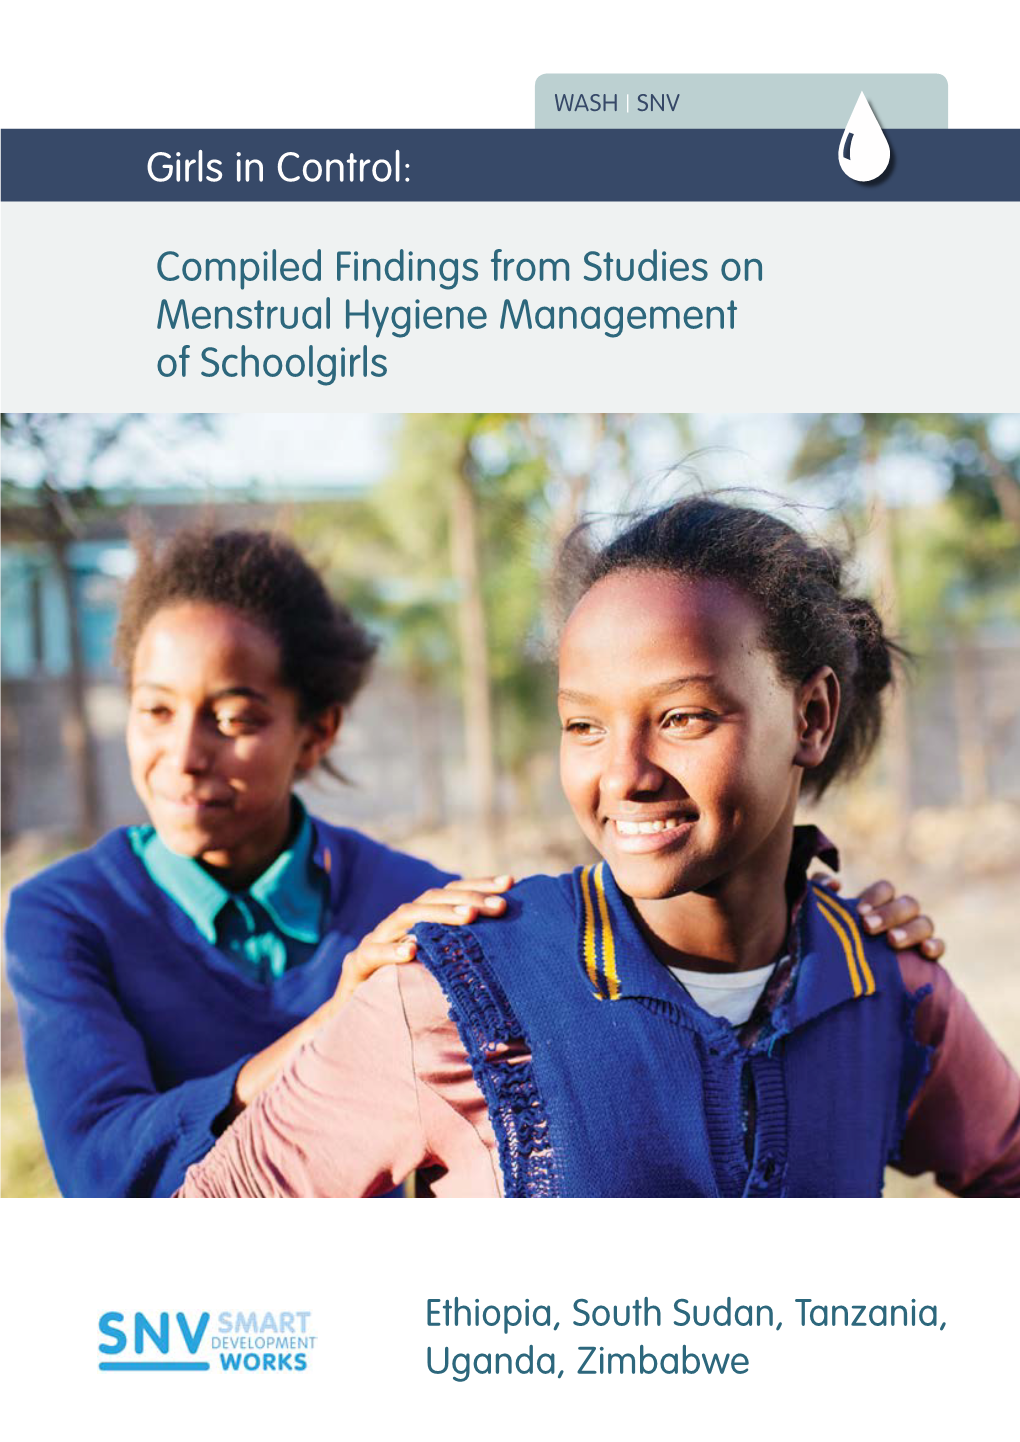 Girls in Control: Compiled Findings from Studies on Menstrual Hygiene Management of Schoolgirls